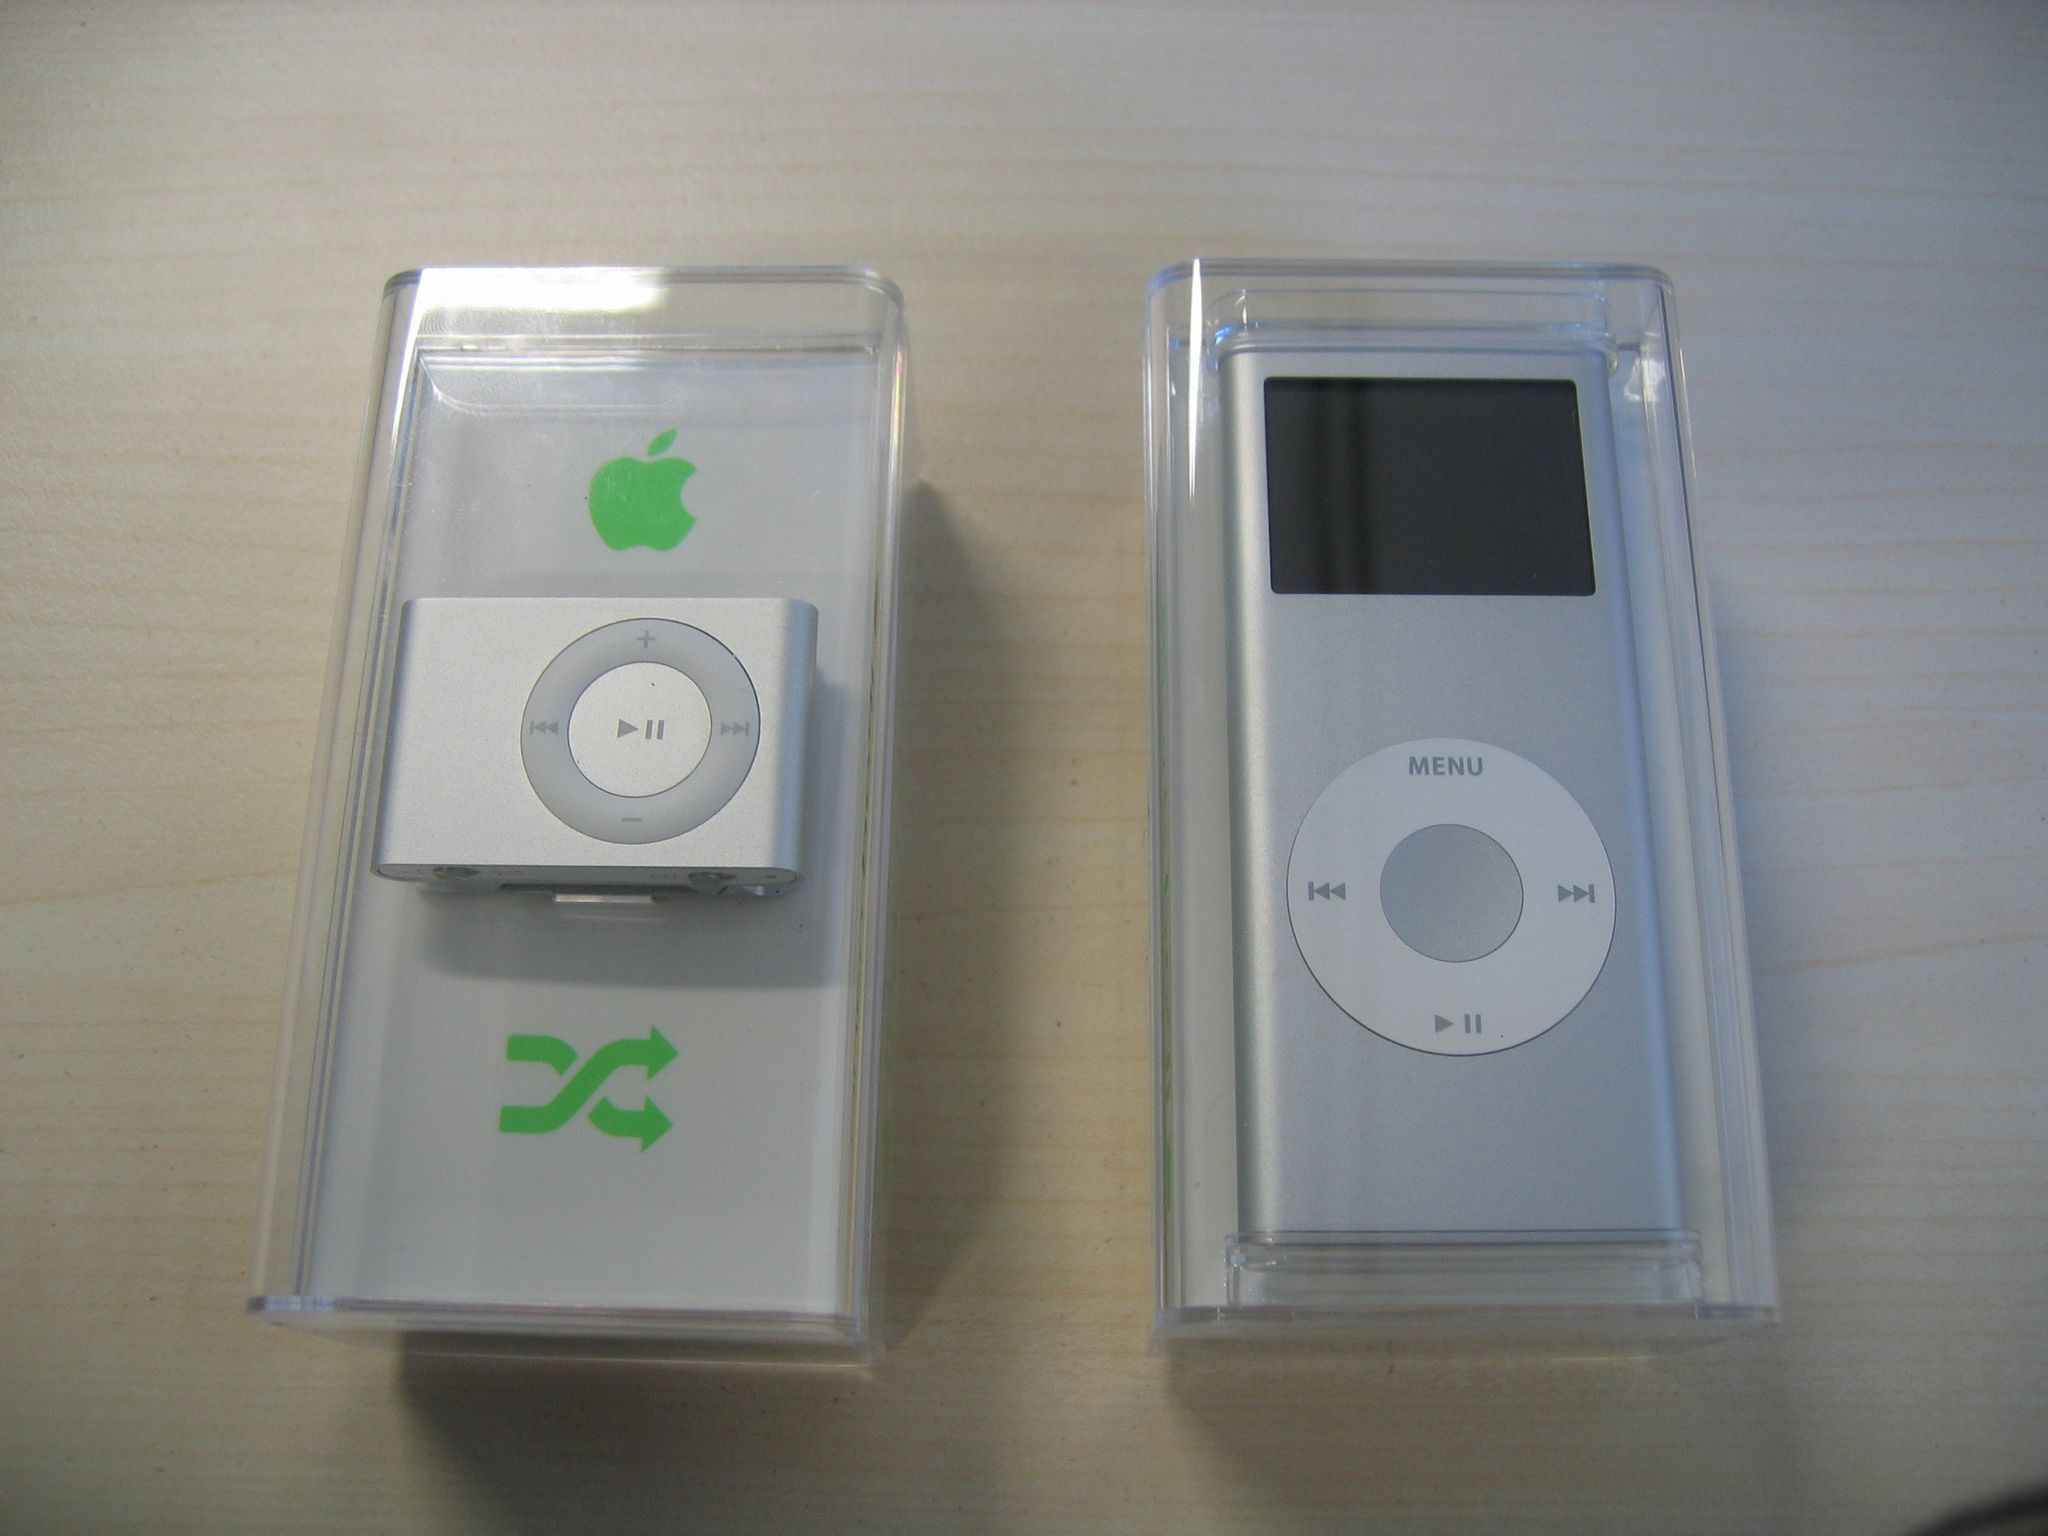 A photo of a silver second-generation iPod shuffle, and a silver second-generation iPod nano, both in their original packaging.